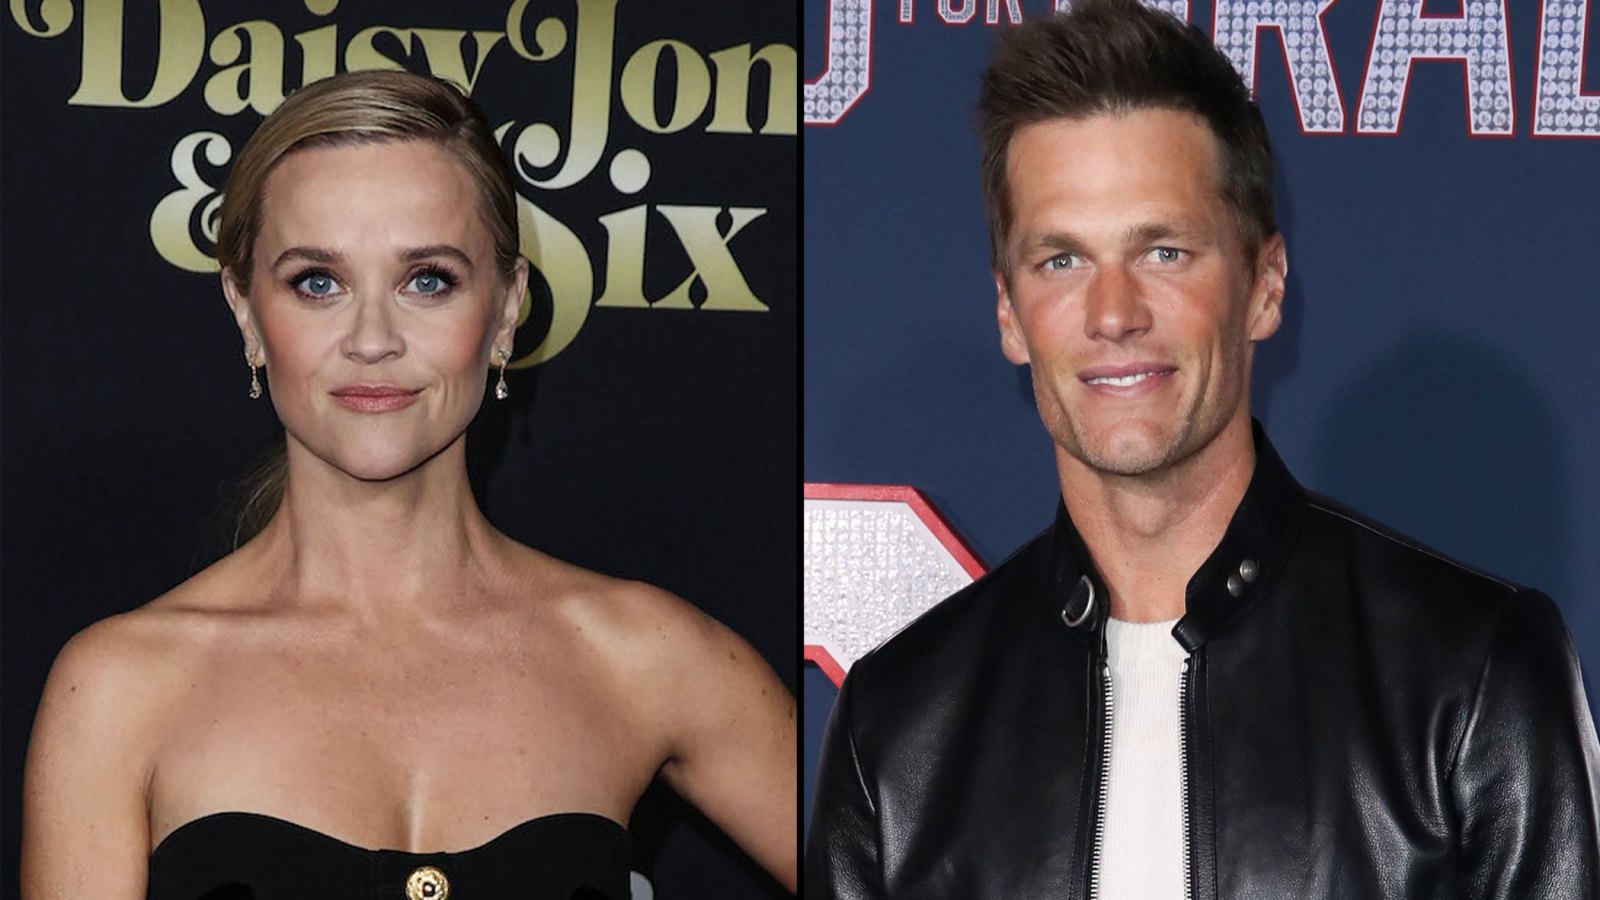 Reese Witherspoon and Tom Brady Are Not Dating After Respective Divorces, Actress' Rep Confirms